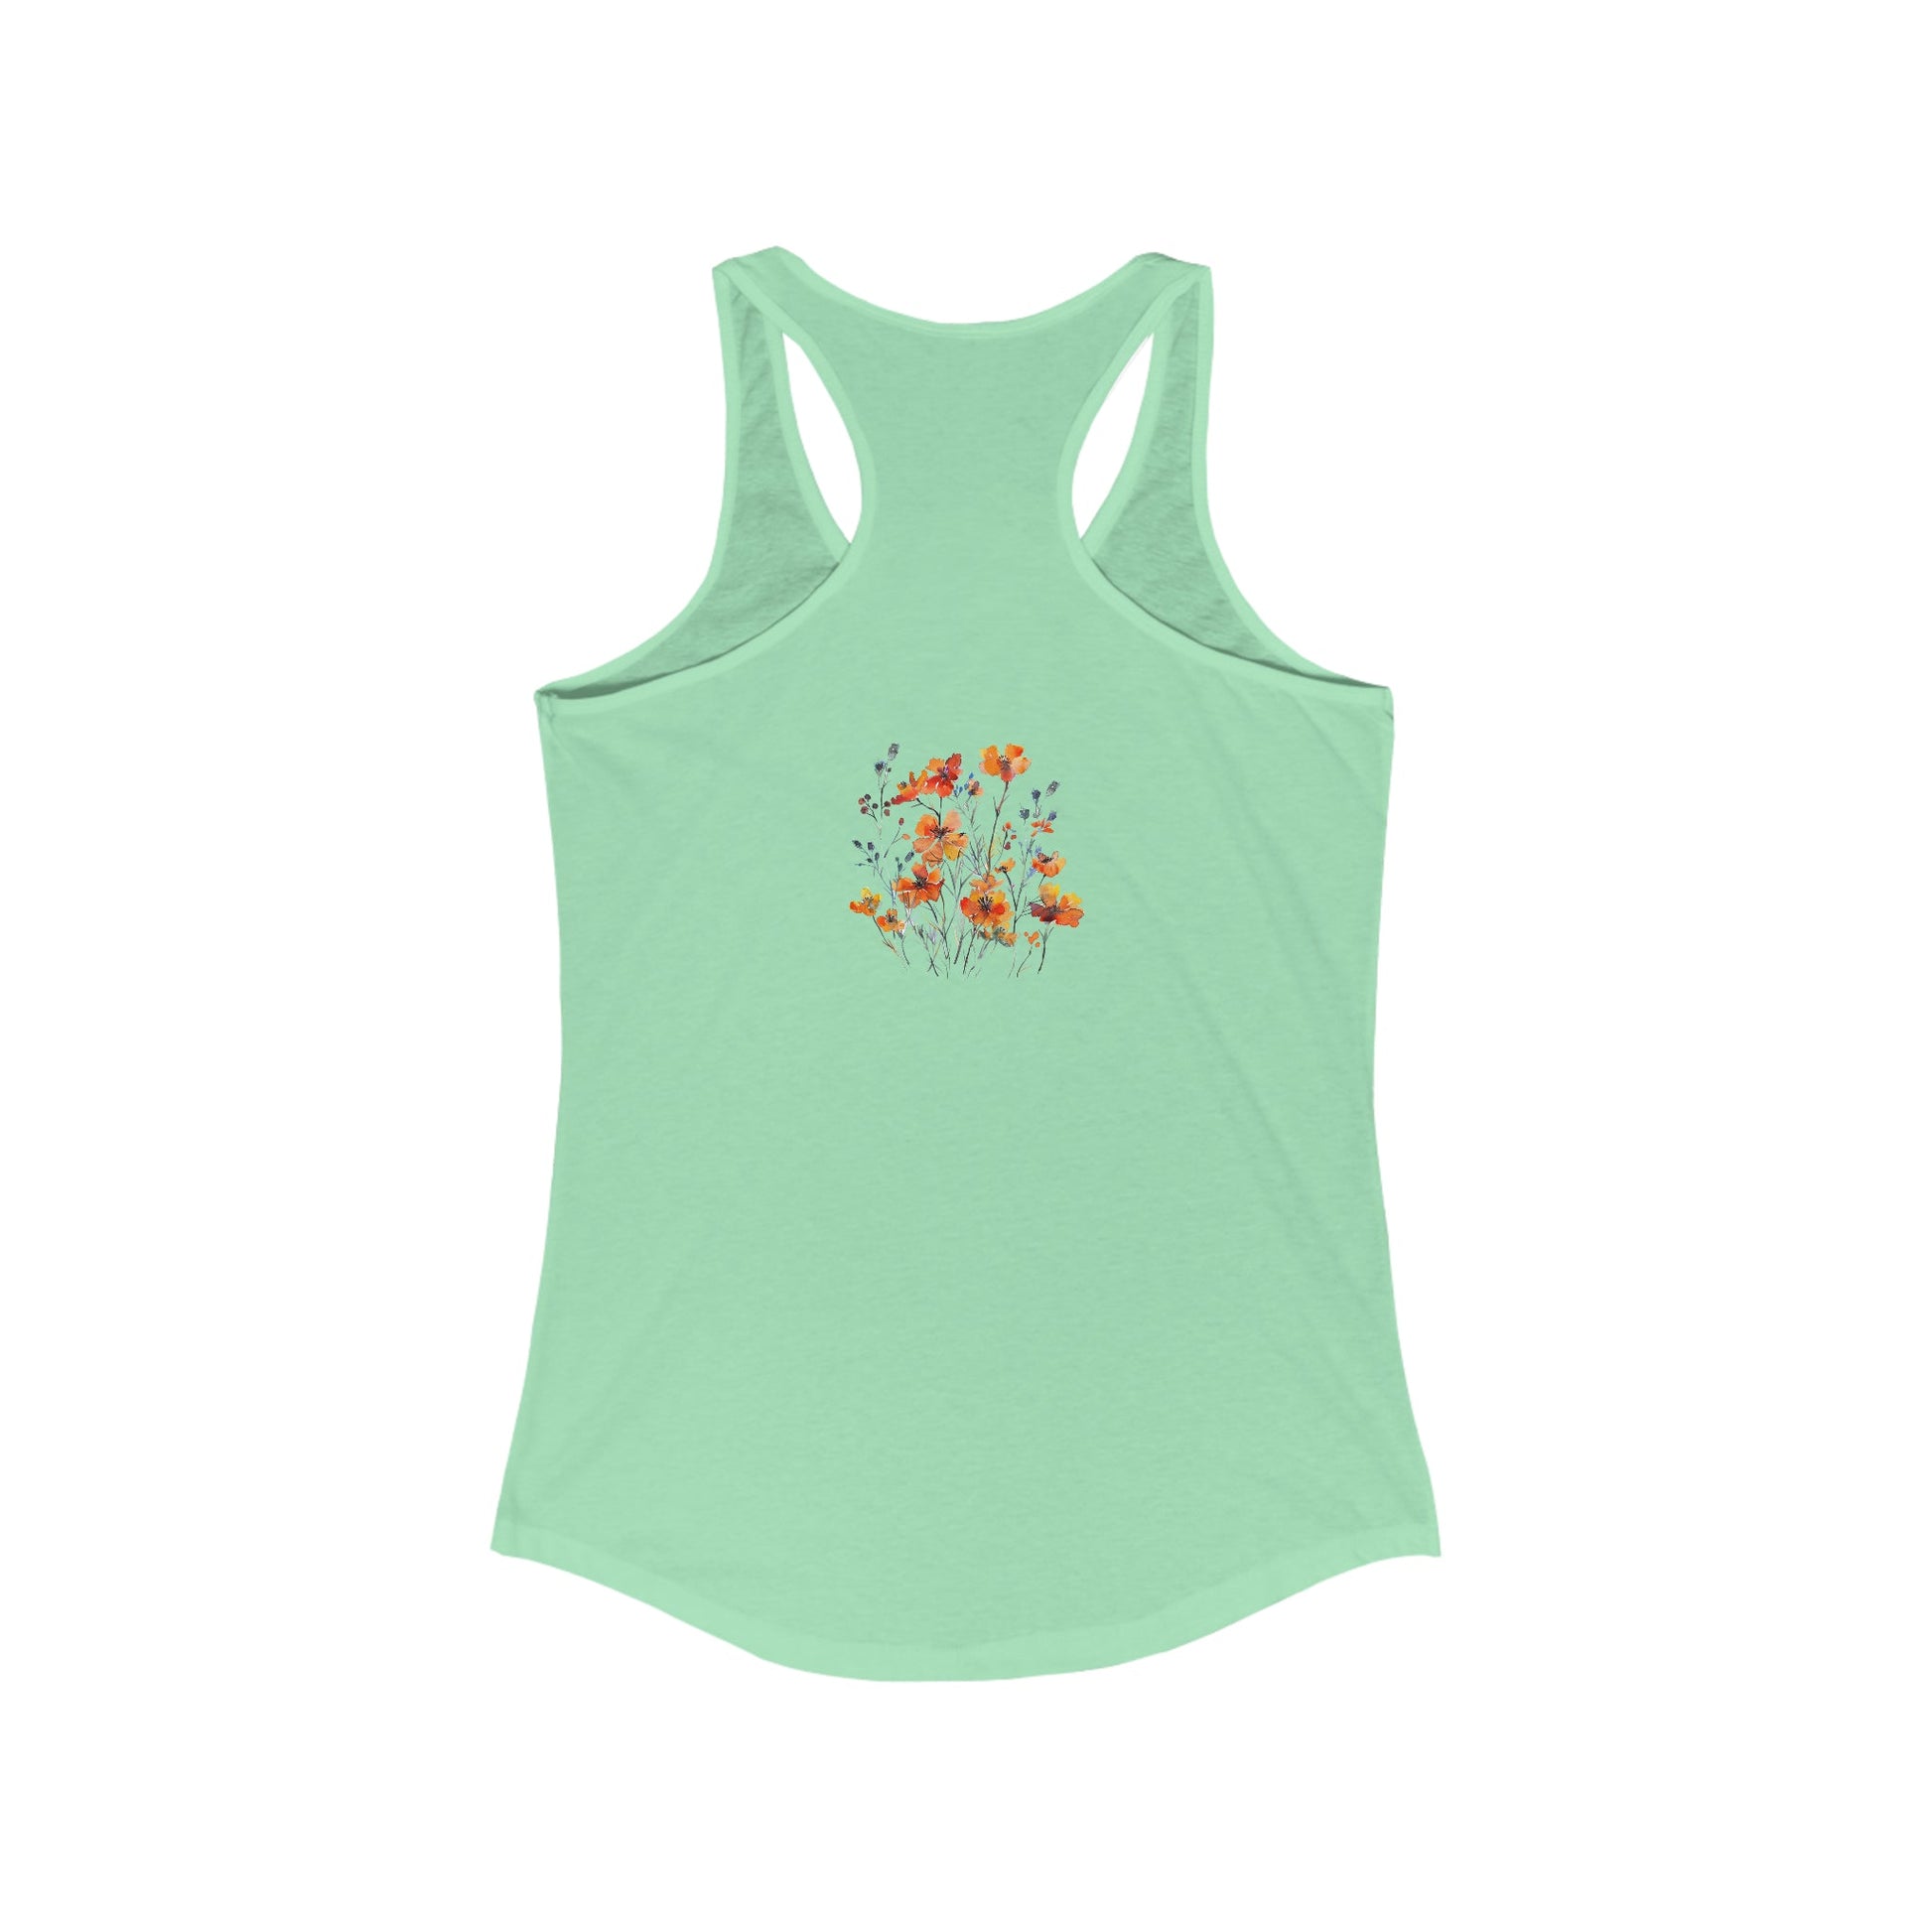 Cowgirl & Tequila Tank Top With Wildflowers Floral Design, Racerback Tank Top - FlooredByArt